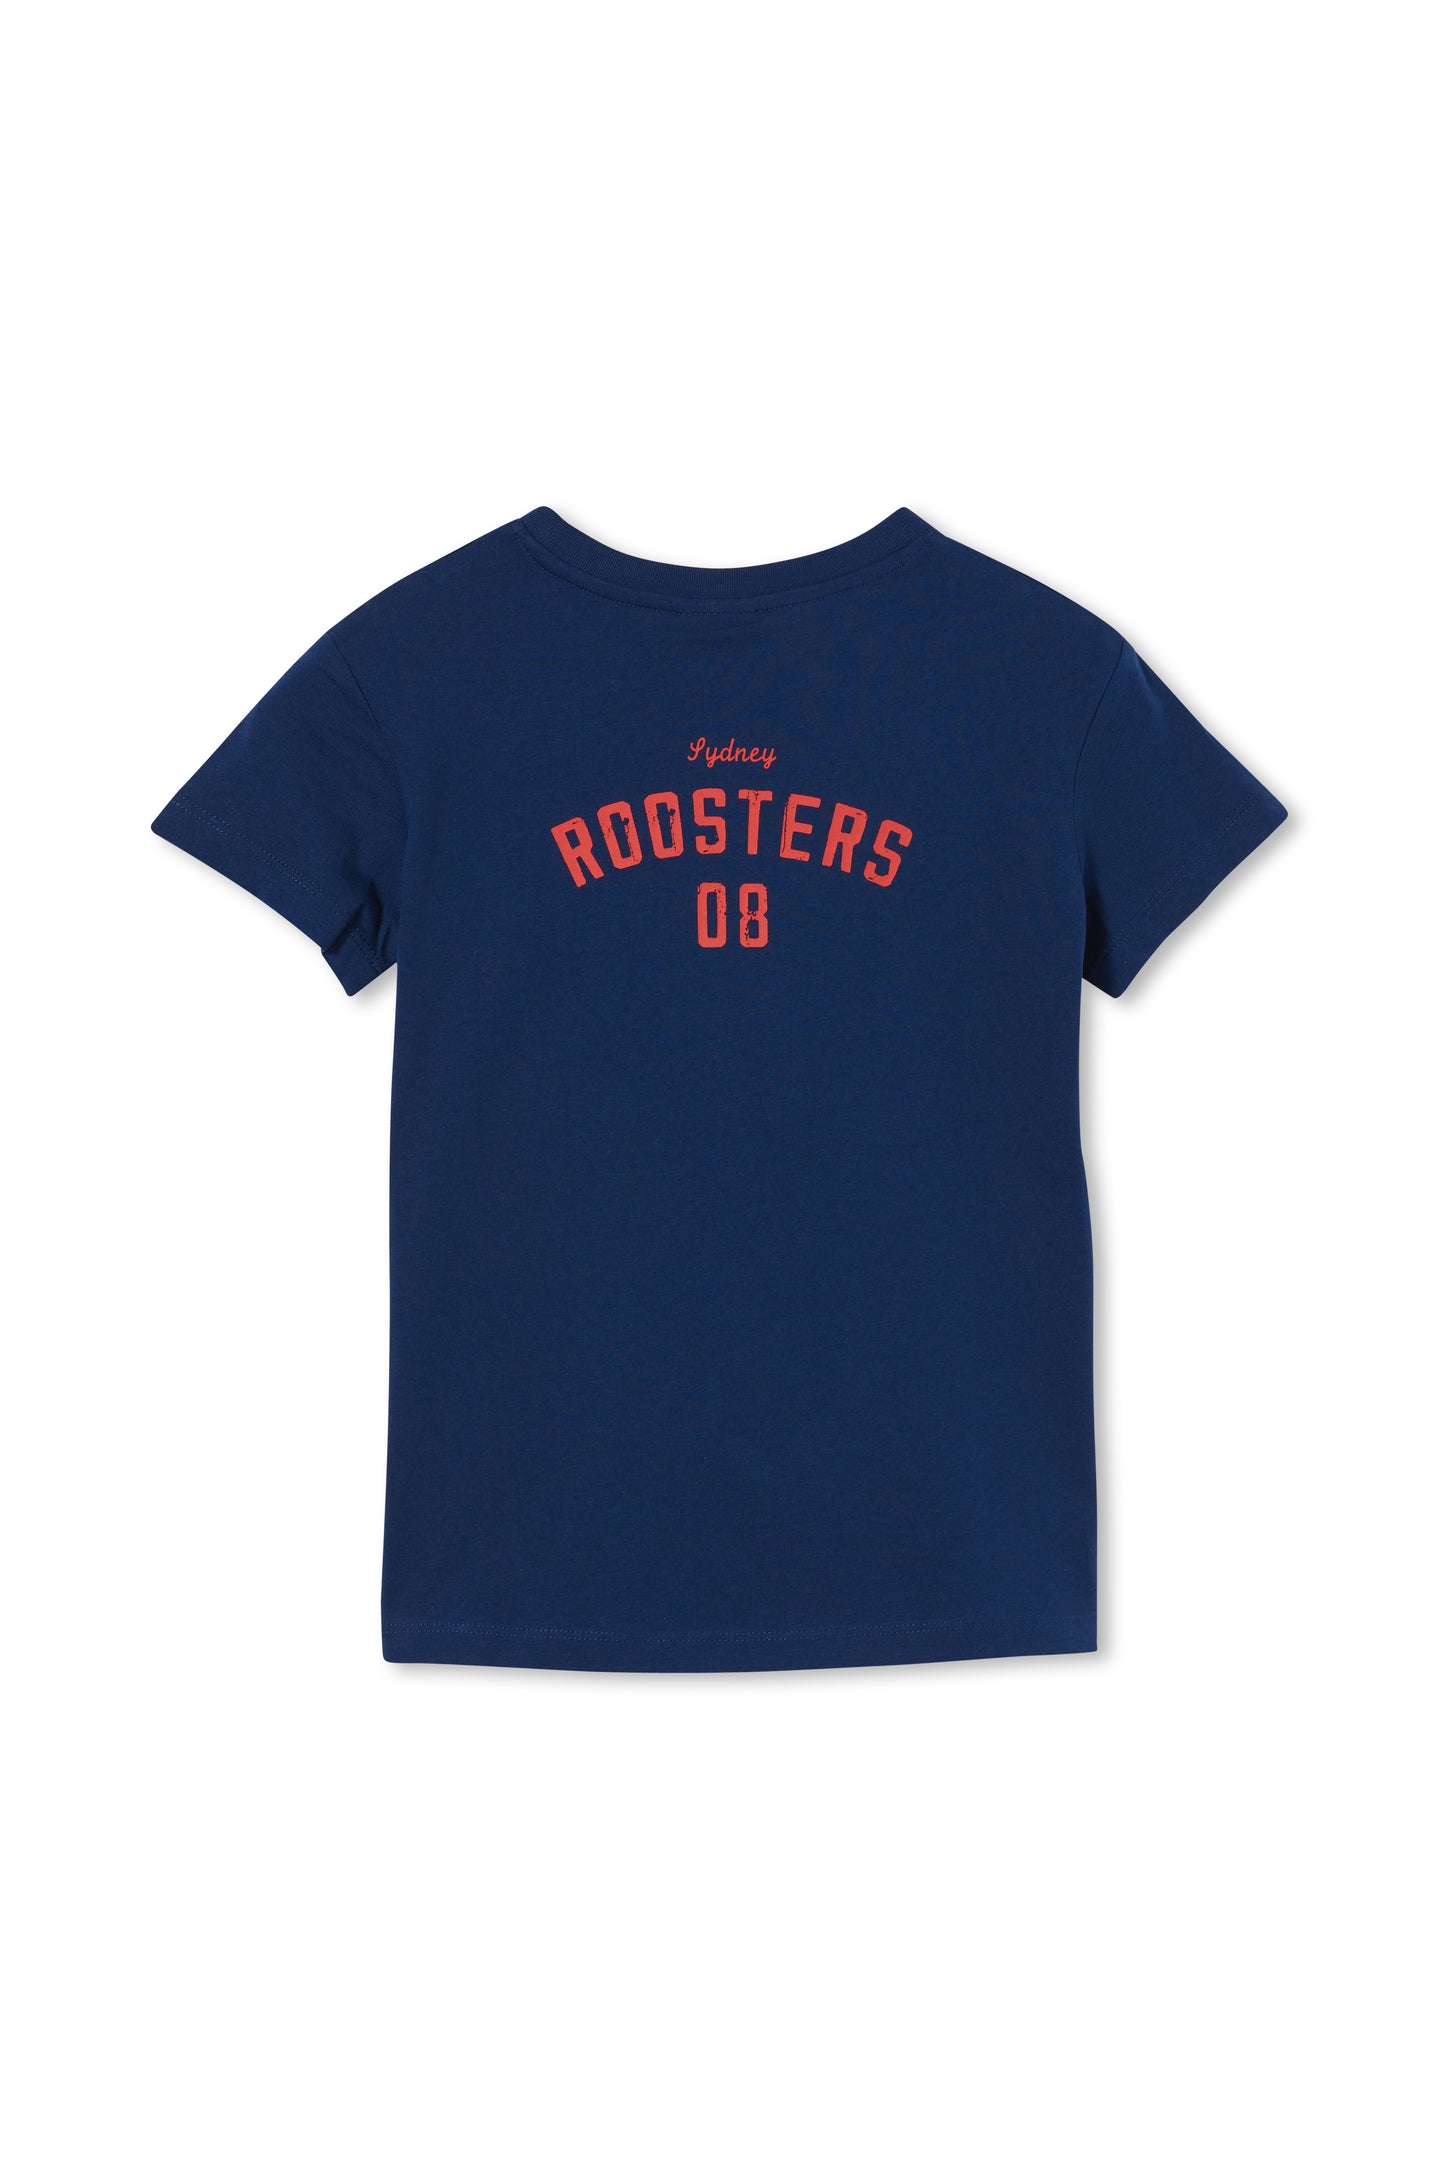 Sydney Roosters Mono Tee Youth